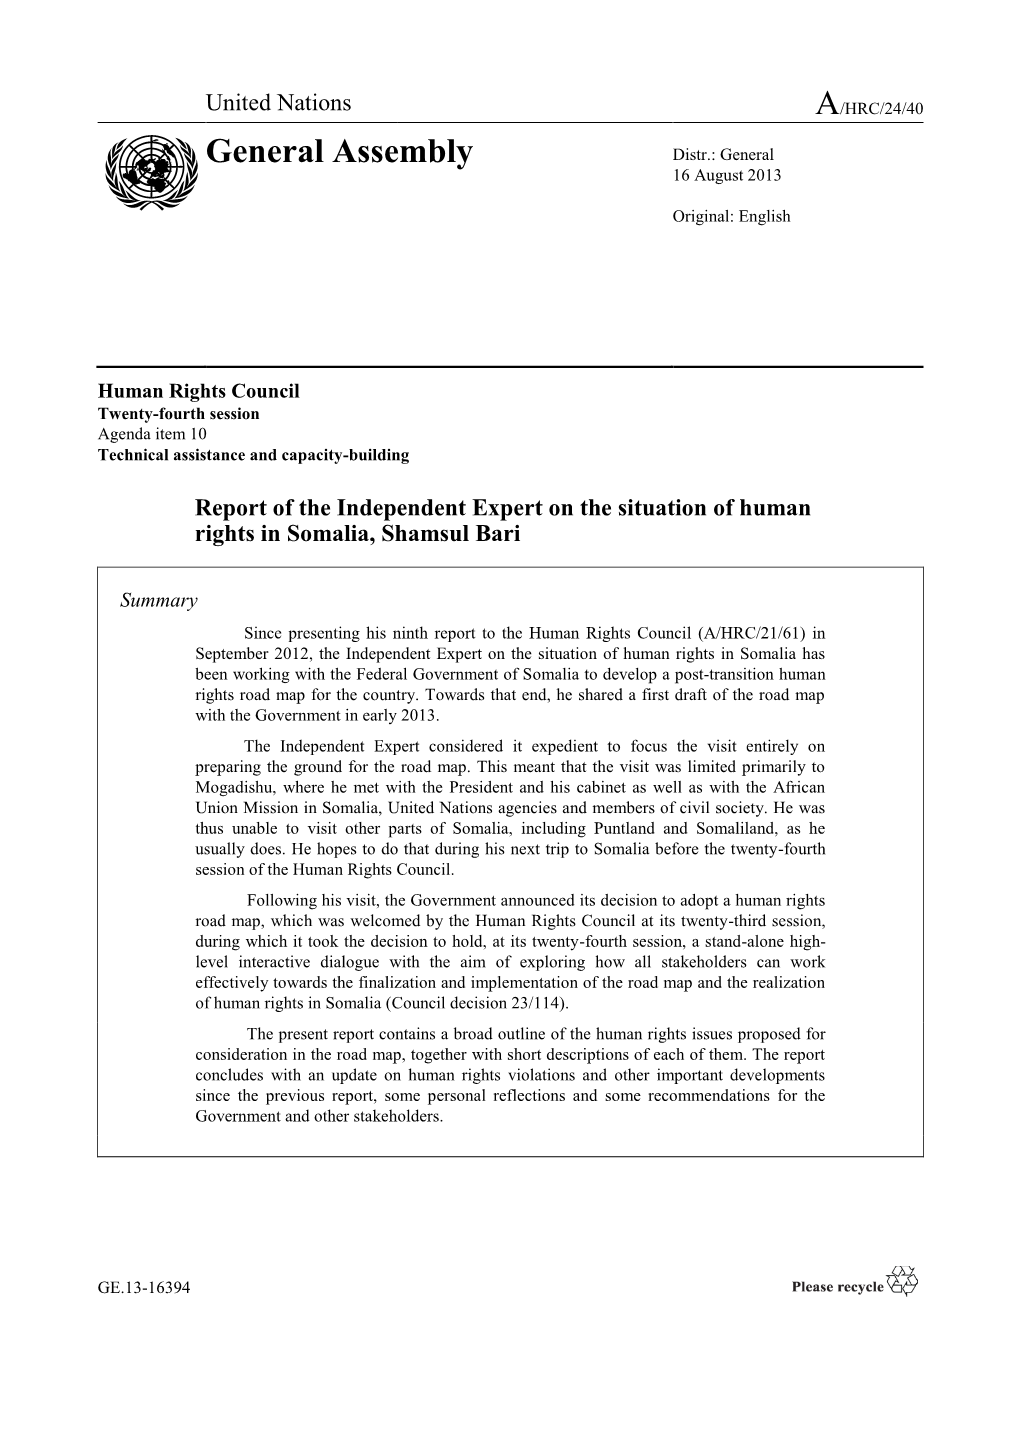 Report of the Independent Expert on the Situation of Human Rights in Somalia, Shamsul Bari